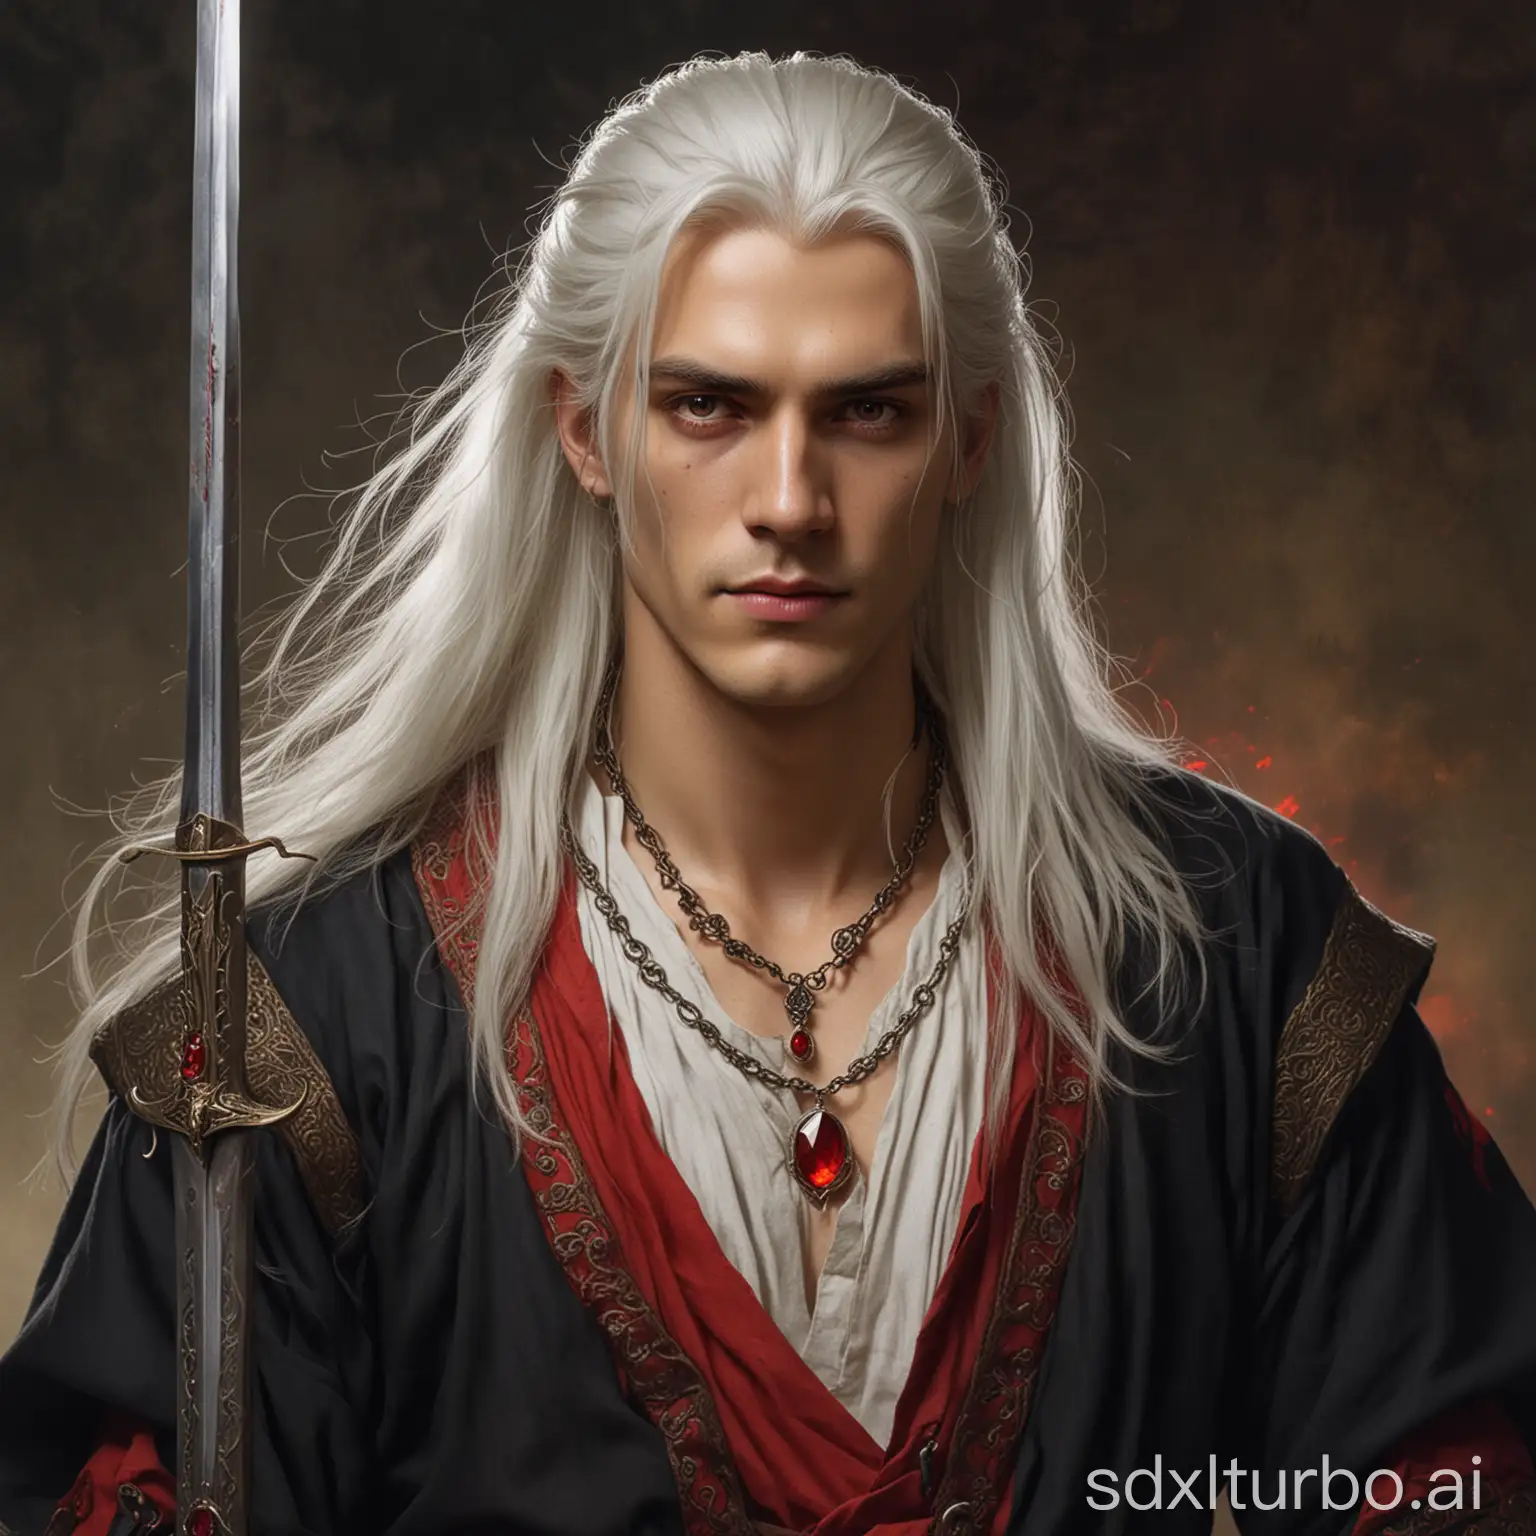 a man about 22, with long white hair that reaches his back, with crimson eyes, wearing a necklace with a bright red stone, wearing a long sword on his back, wearing medieval era clothes.